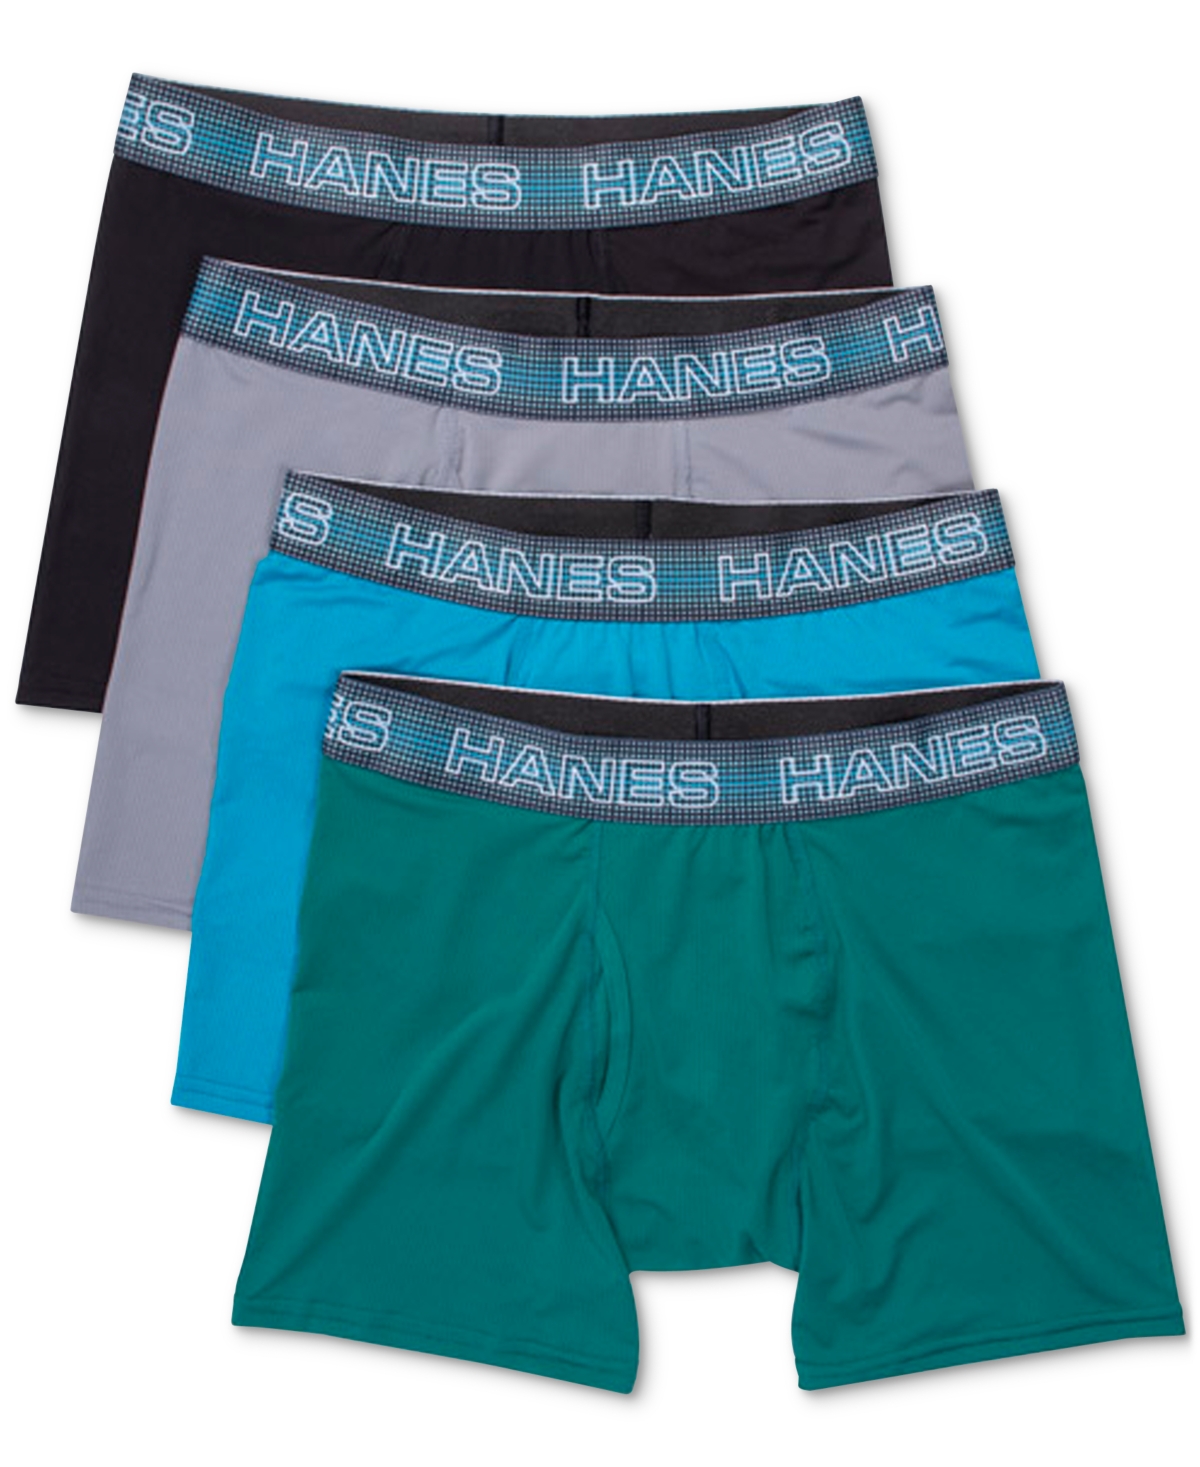 x Hanes tagless boxer briefs (pack of 4)